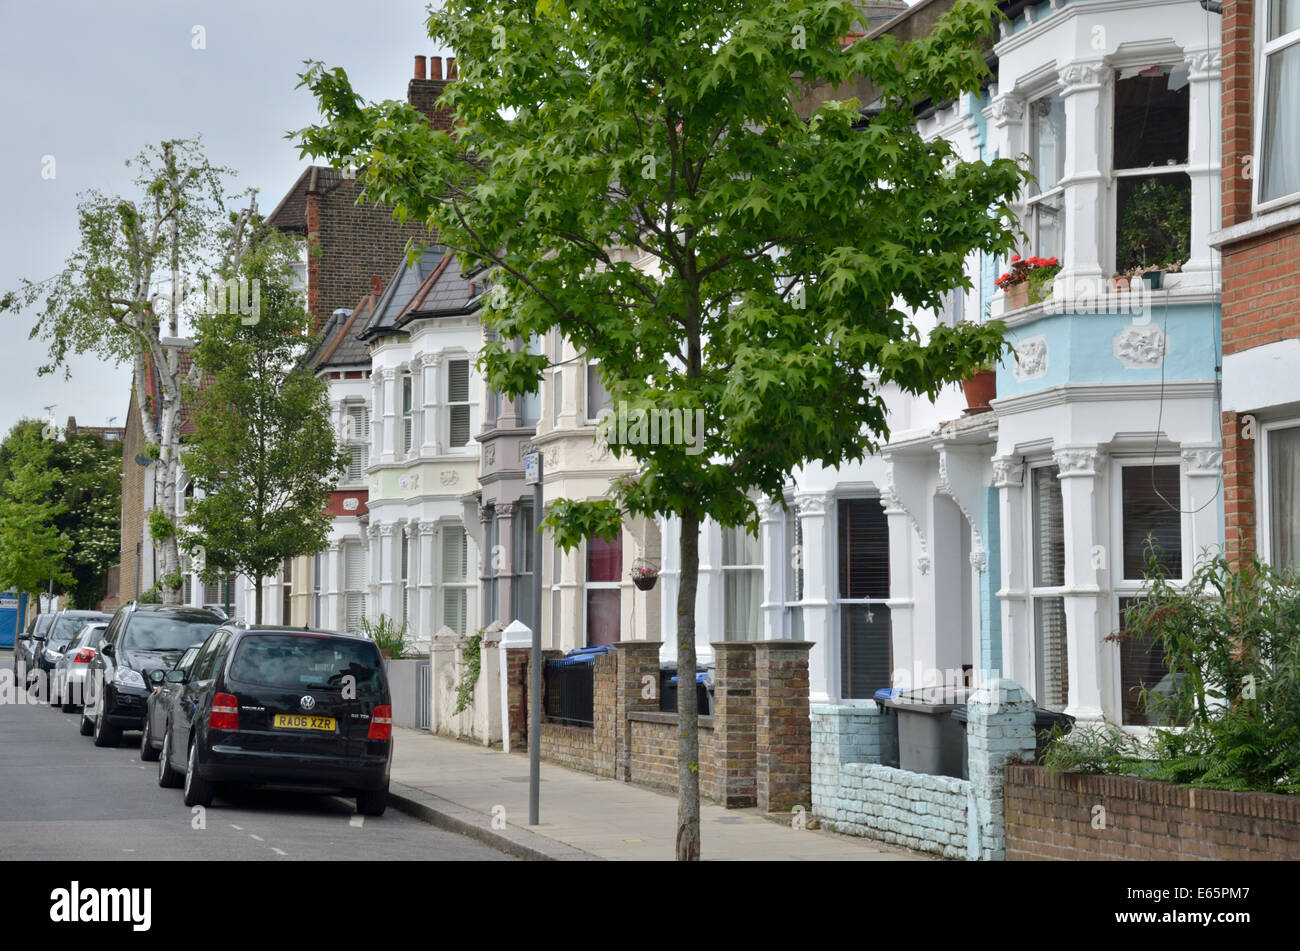 Tennyson Road NW6 in Queen’s Park, London, UK. Stock Photo